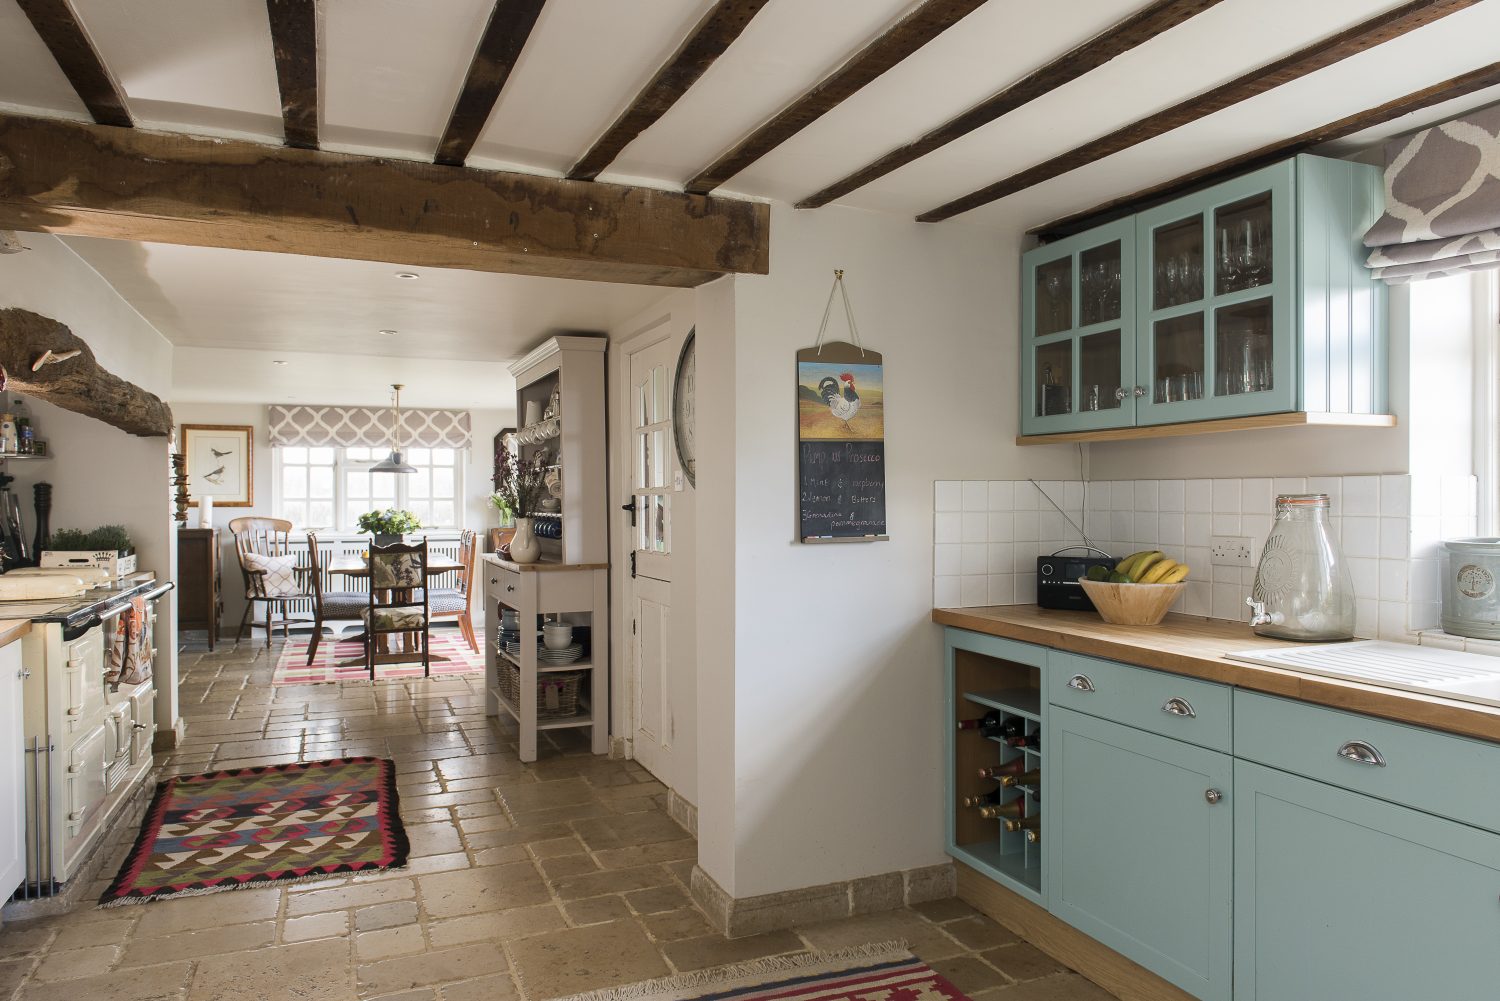 Jo put in the dining room extension which joins up the kitchen and the snug, when she first moved in 14 years ago, combining the beams of the original 16th century cottage with a light airy modern feel. The glorious four-oven Aga, was already in place